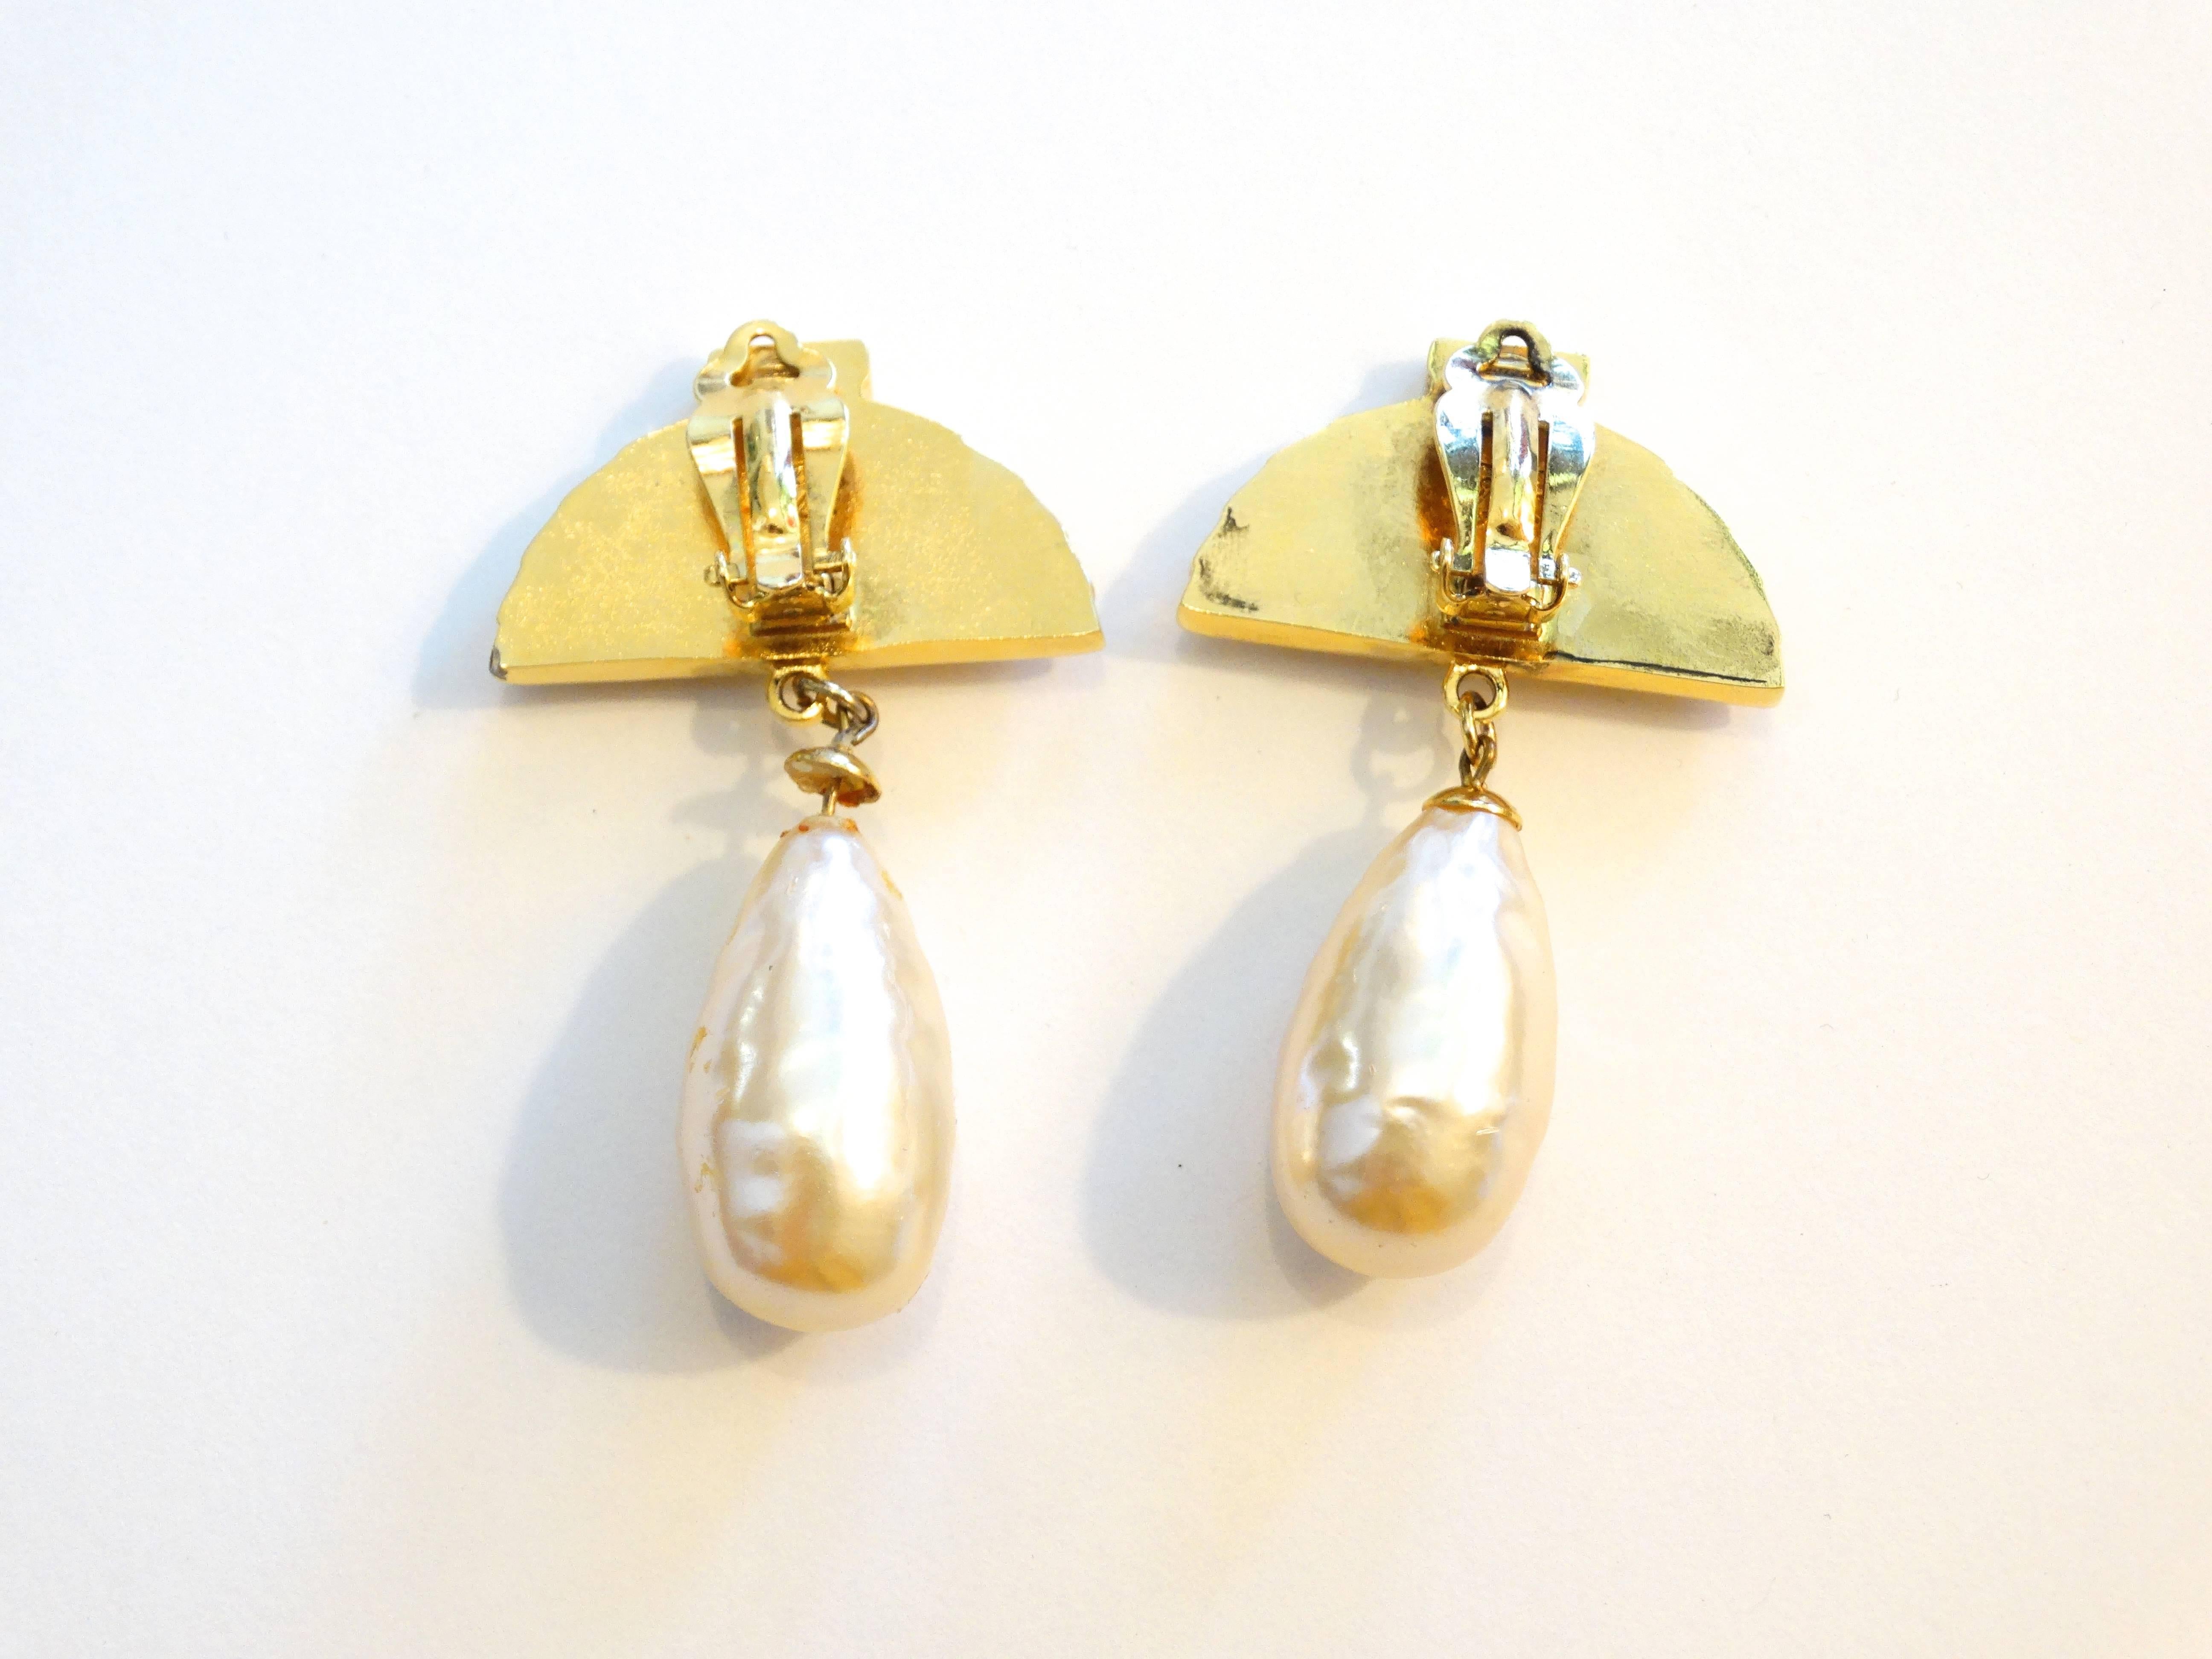 Beautiful fan statement earrings designed by Karl Lagerfeld gold tone with a large faux pearl. Signature watermark of Karl Lagerfeld on both earrings. Made in France 